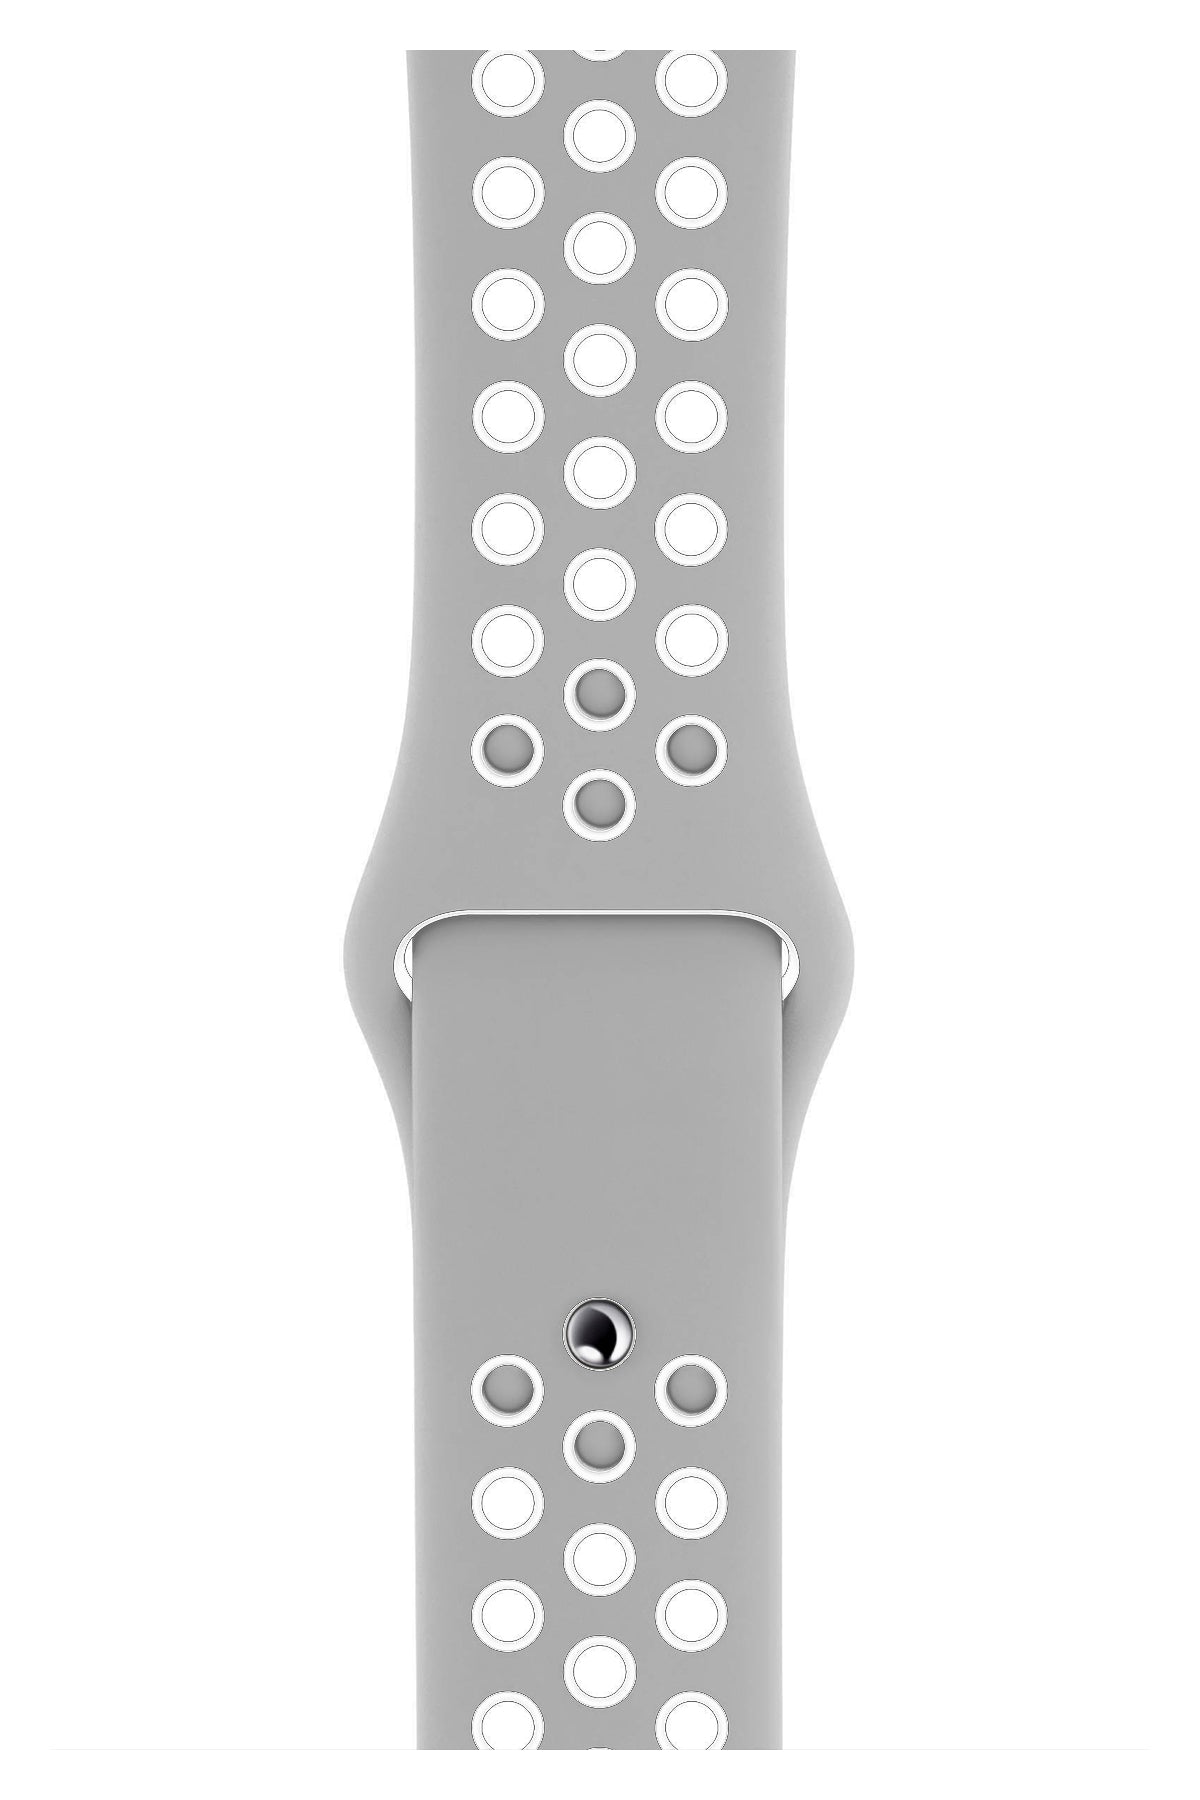 Apple Watch Compatible Silicone Perforated Sport Band Gray White 